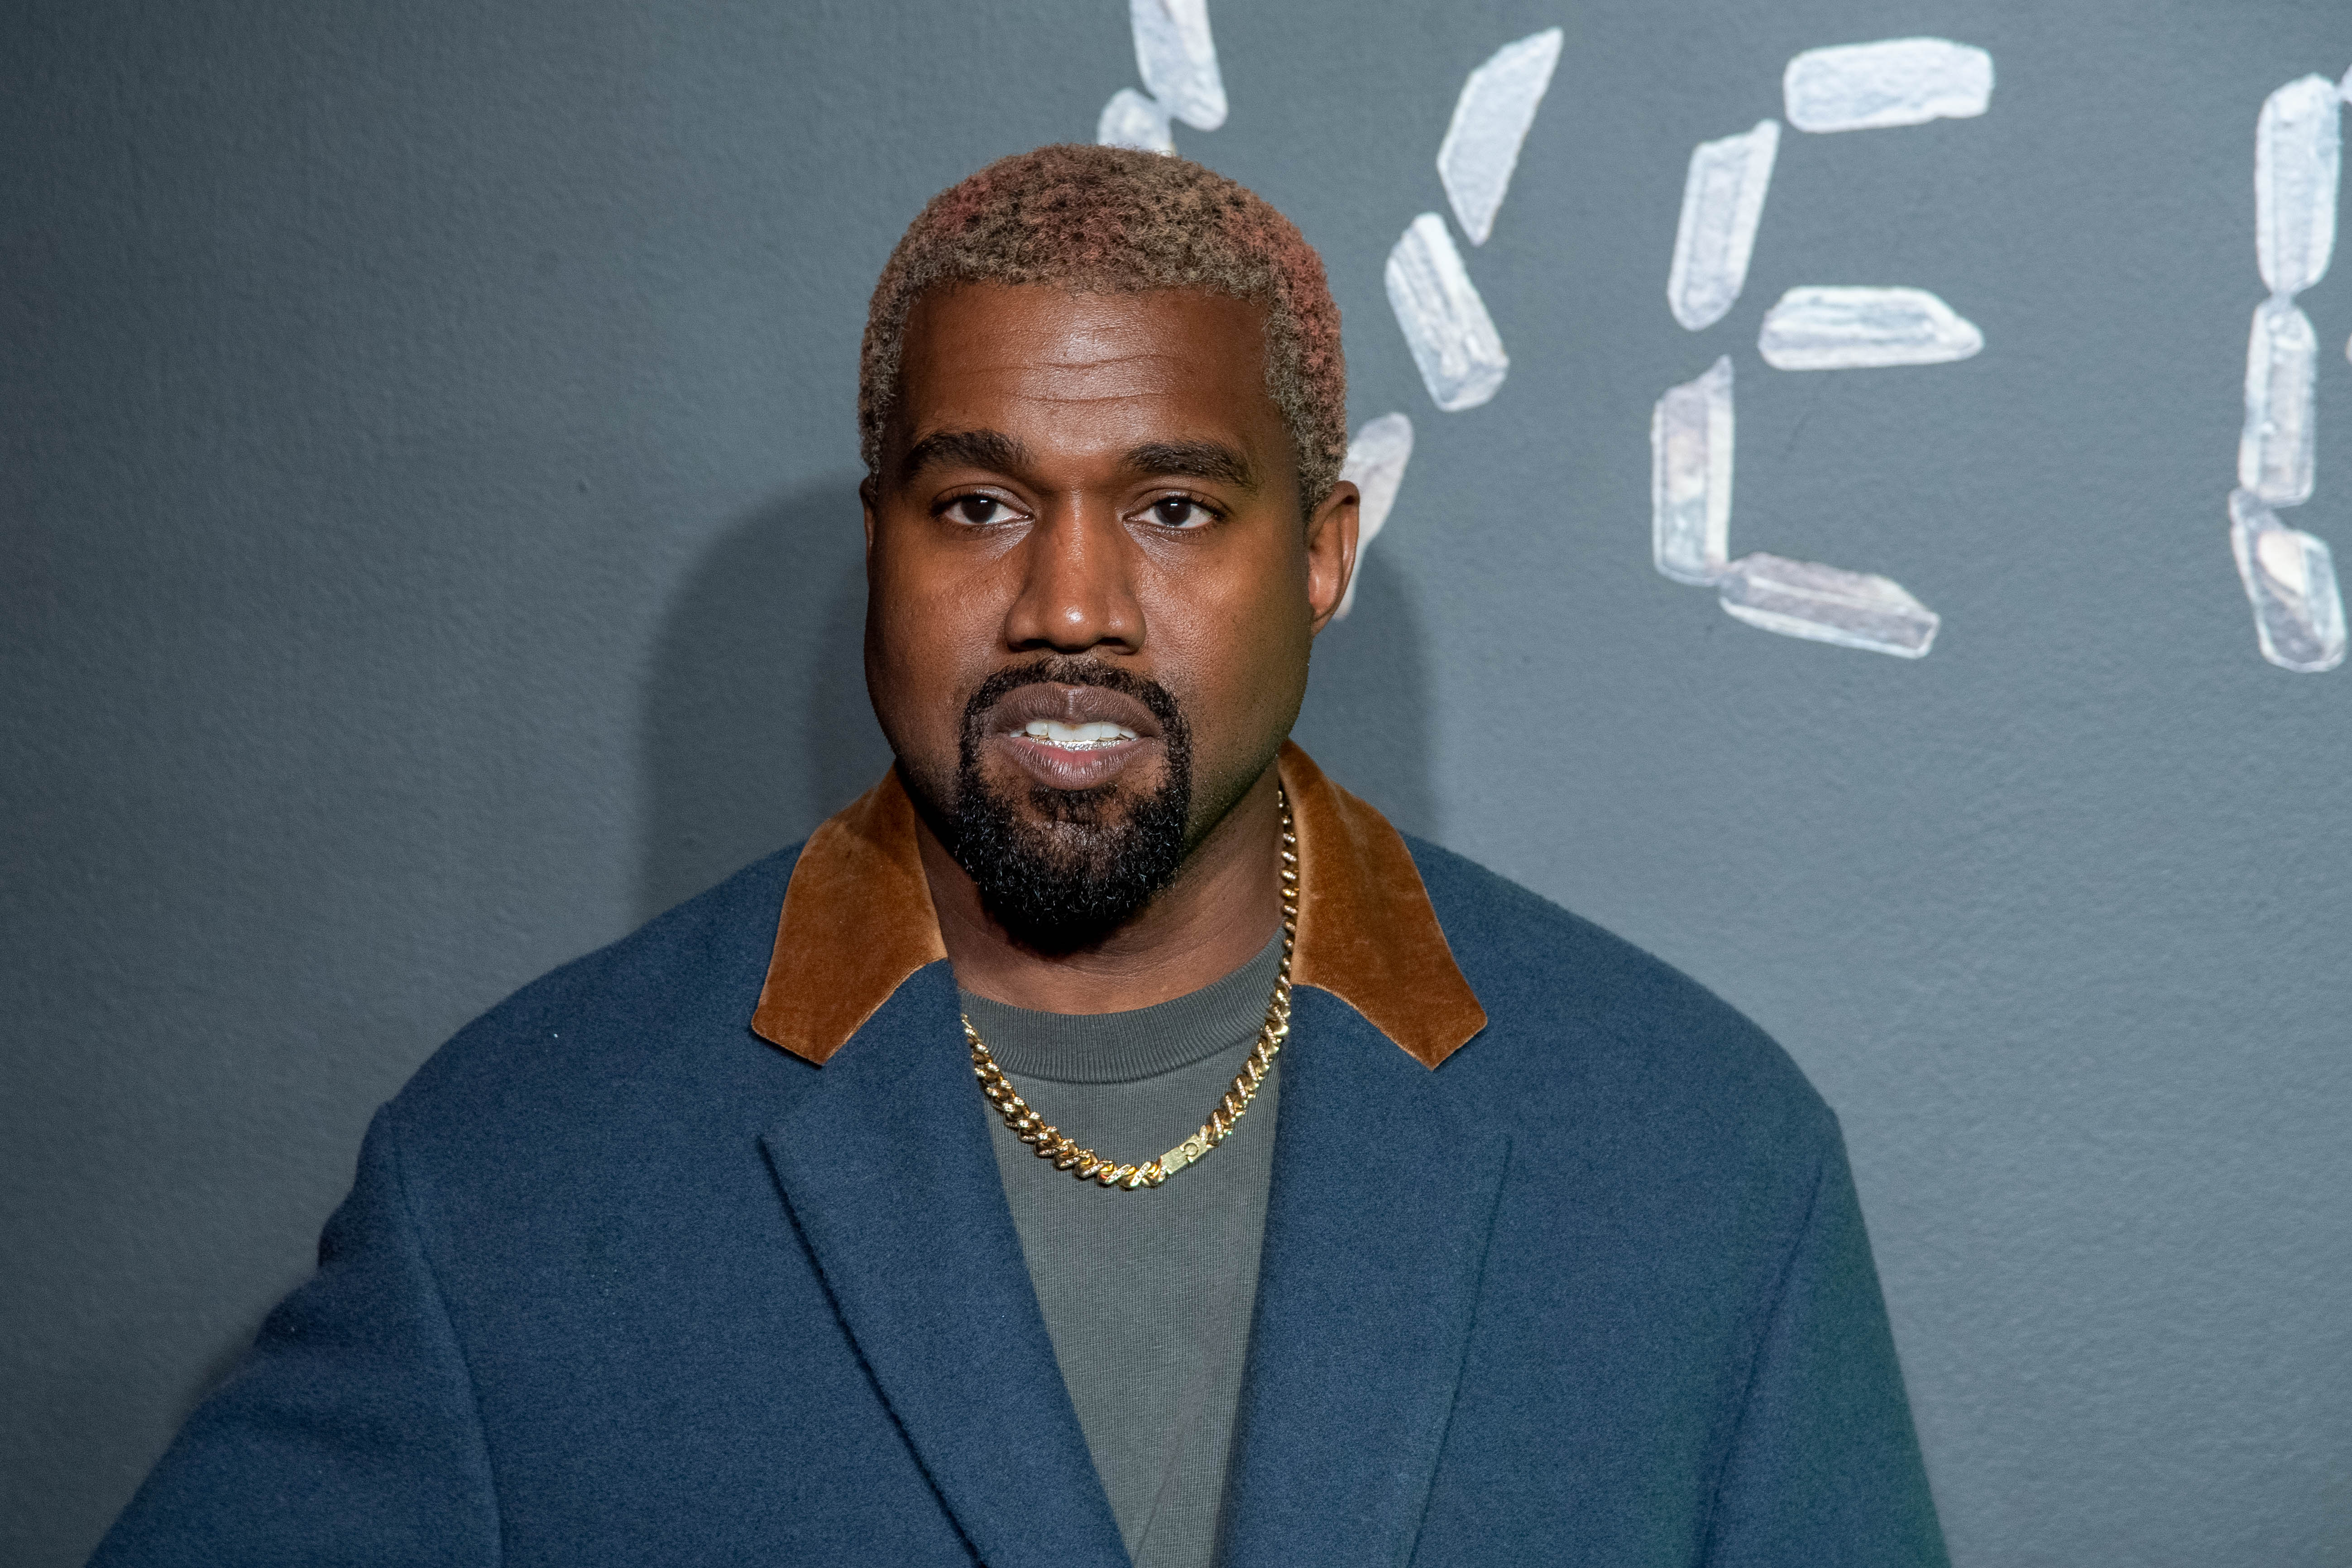 Kanye West attends the Versace fall 2019 fashion show at the American Stock Exchange Building in lower Manhattan on December 02, 2018 in New York City | Photo: GettyImages